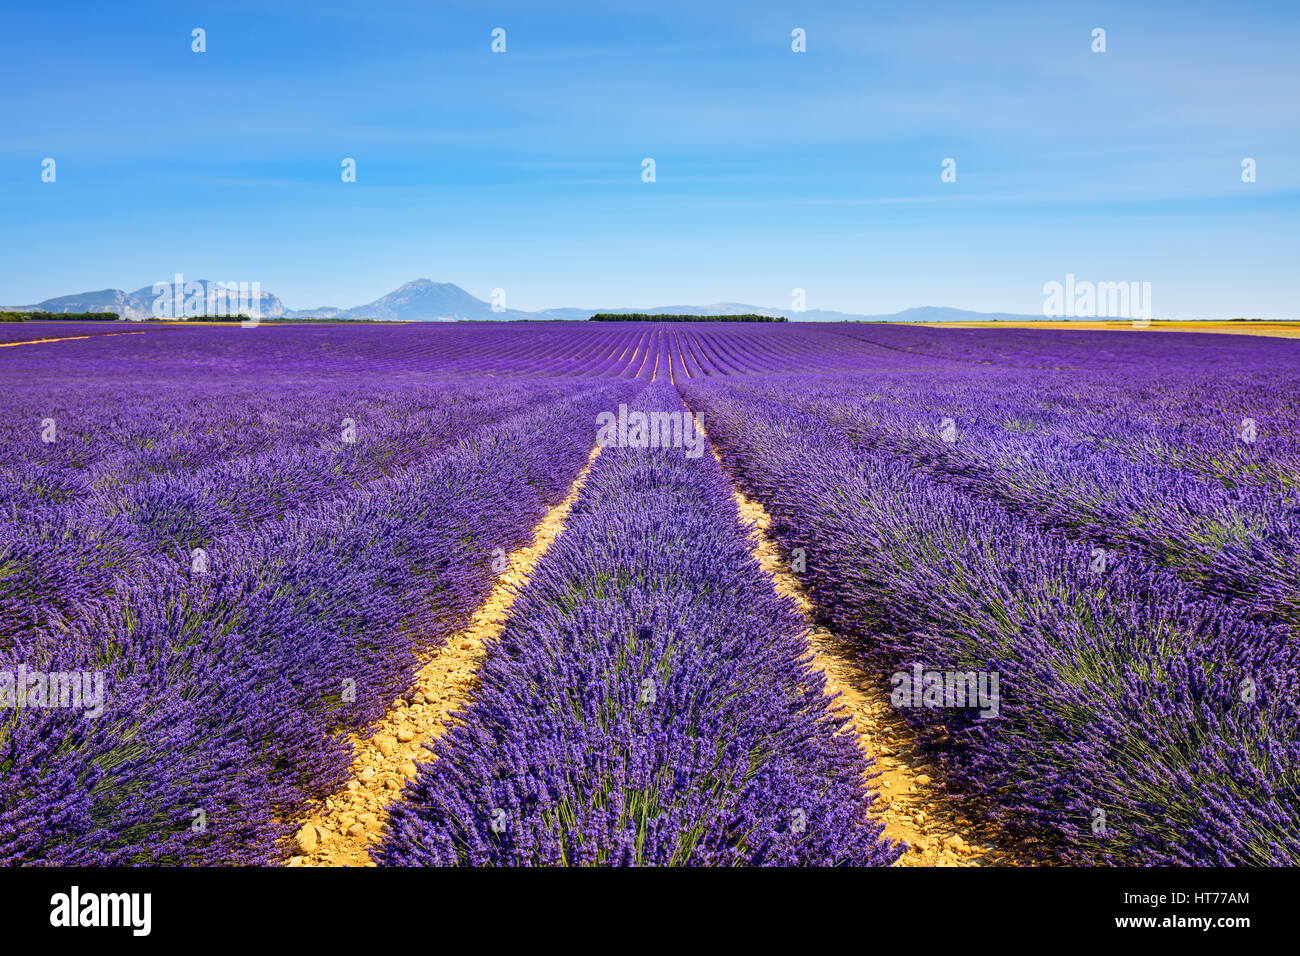 Lavender flower blooming scented fields in endless rows and trees on background. Valensole plateau, provence, france, europe. Stock Photo